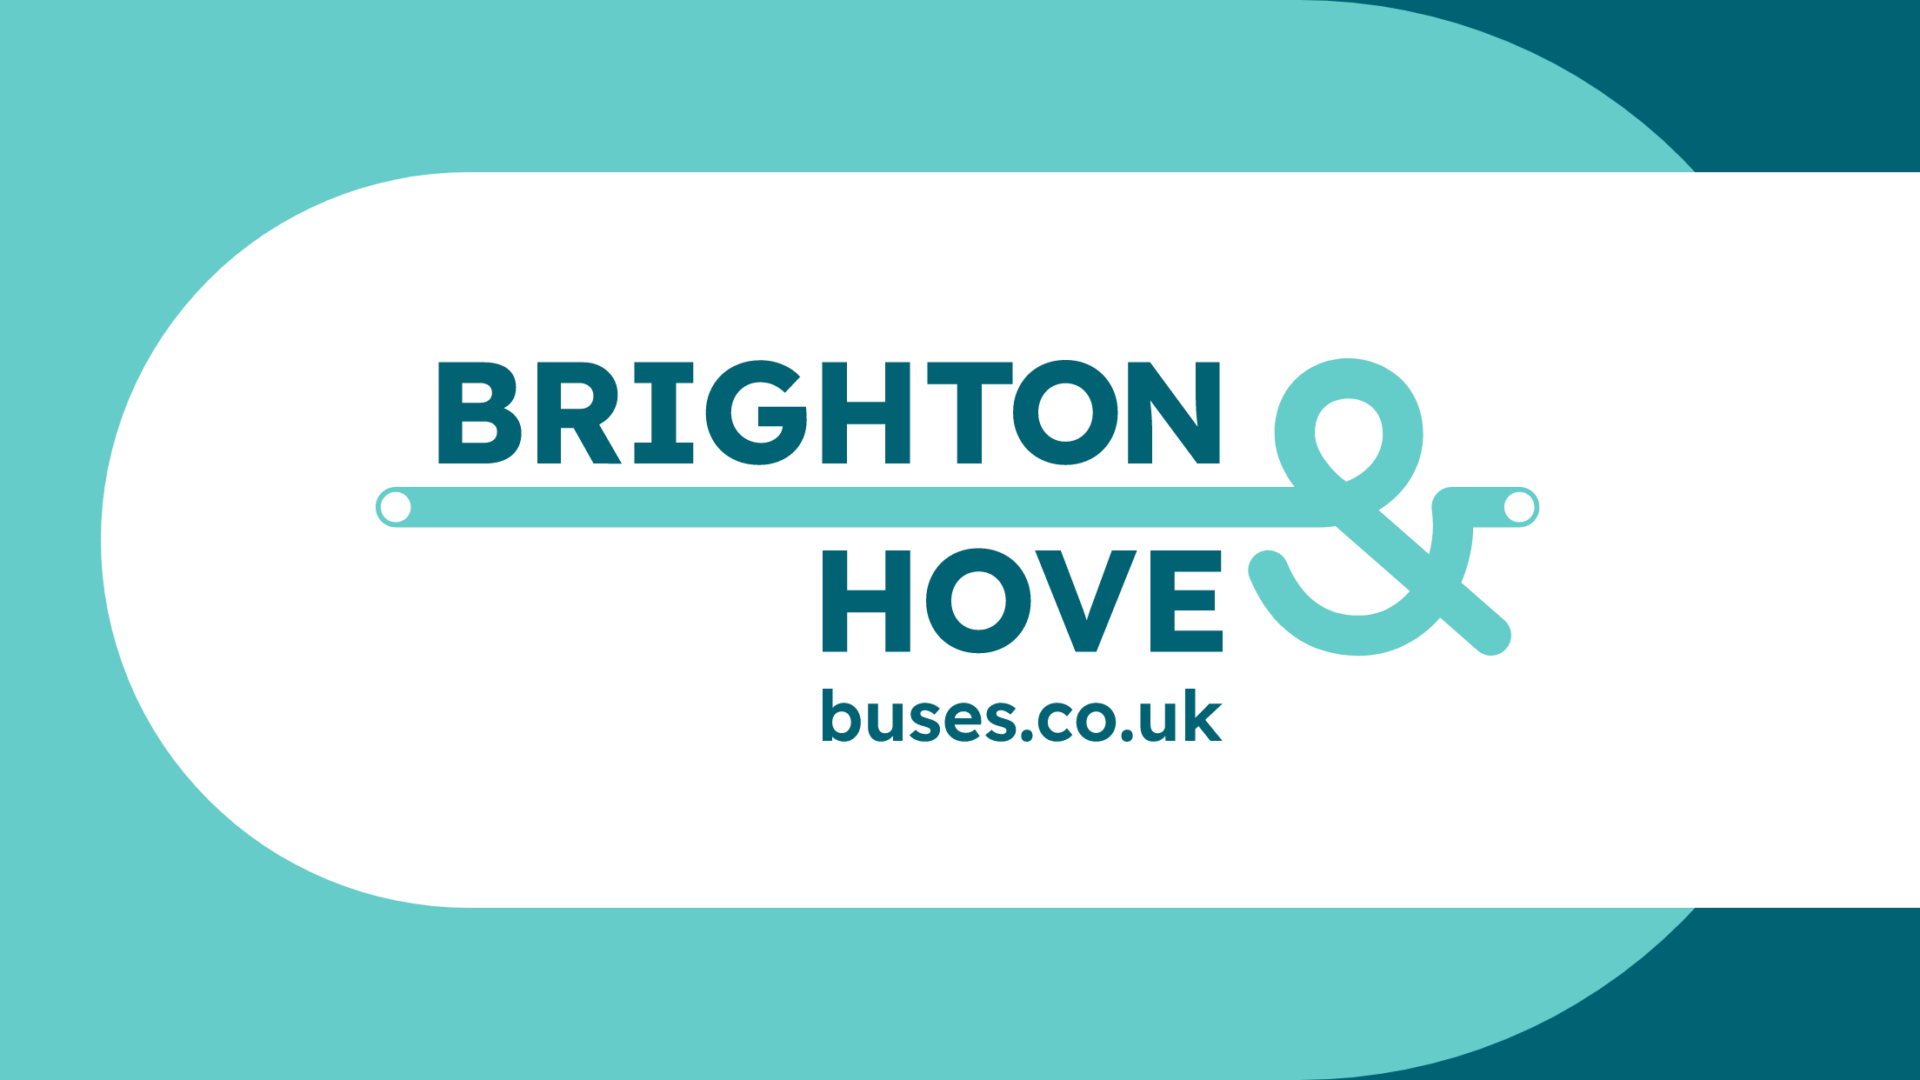 New teal/turquoise logo for Brighton & Hove Buses